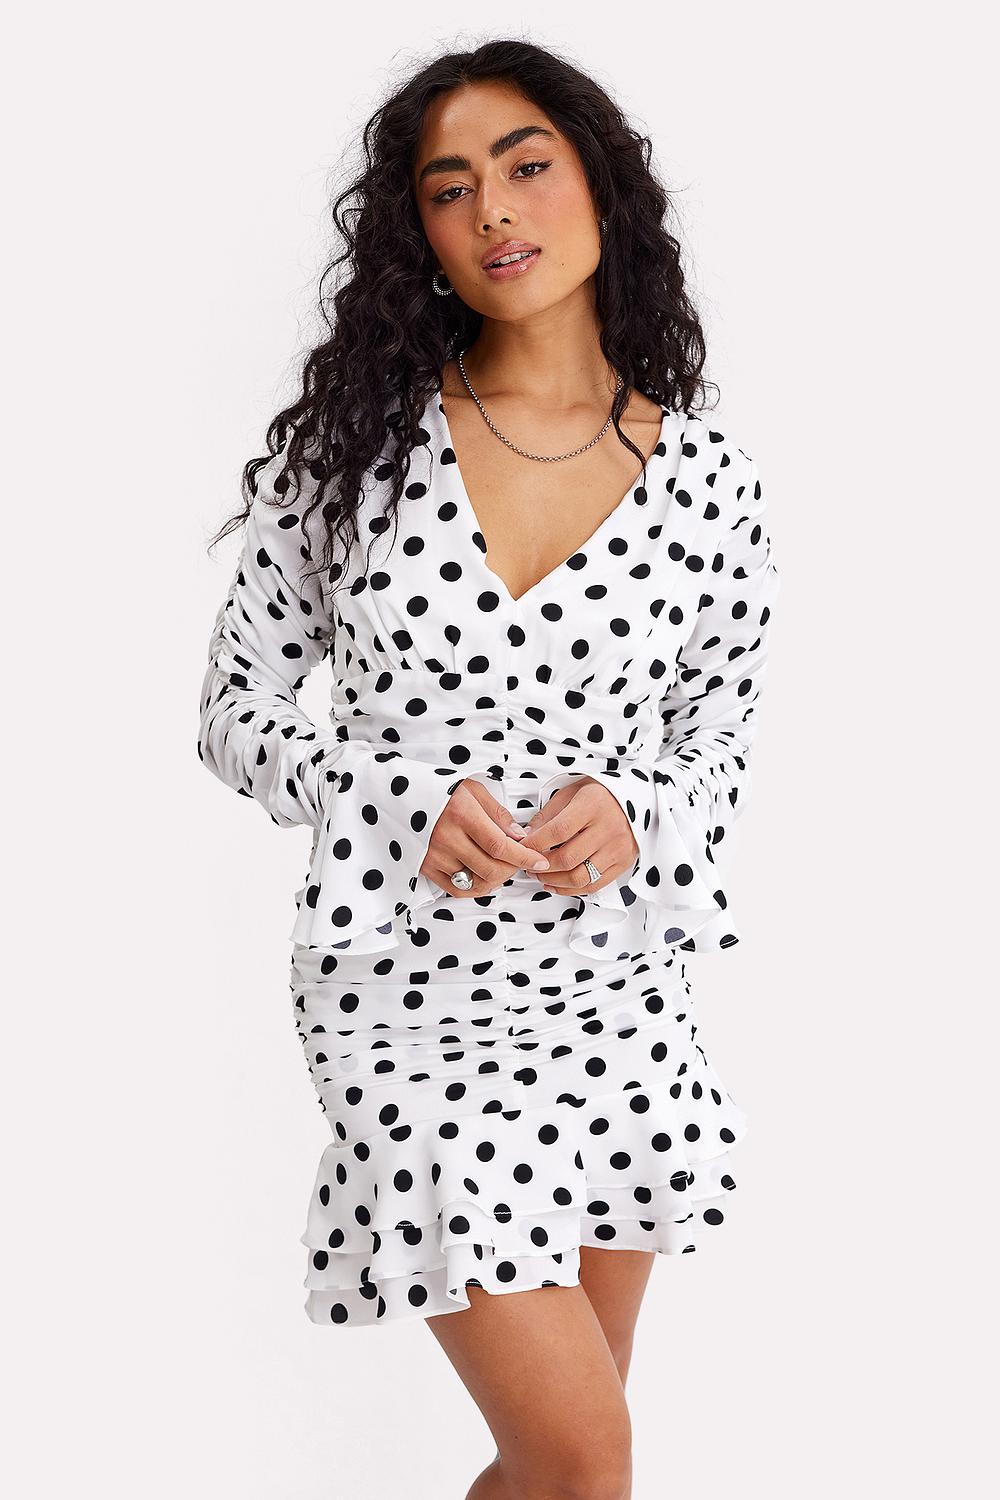 Offwhite dress with dots